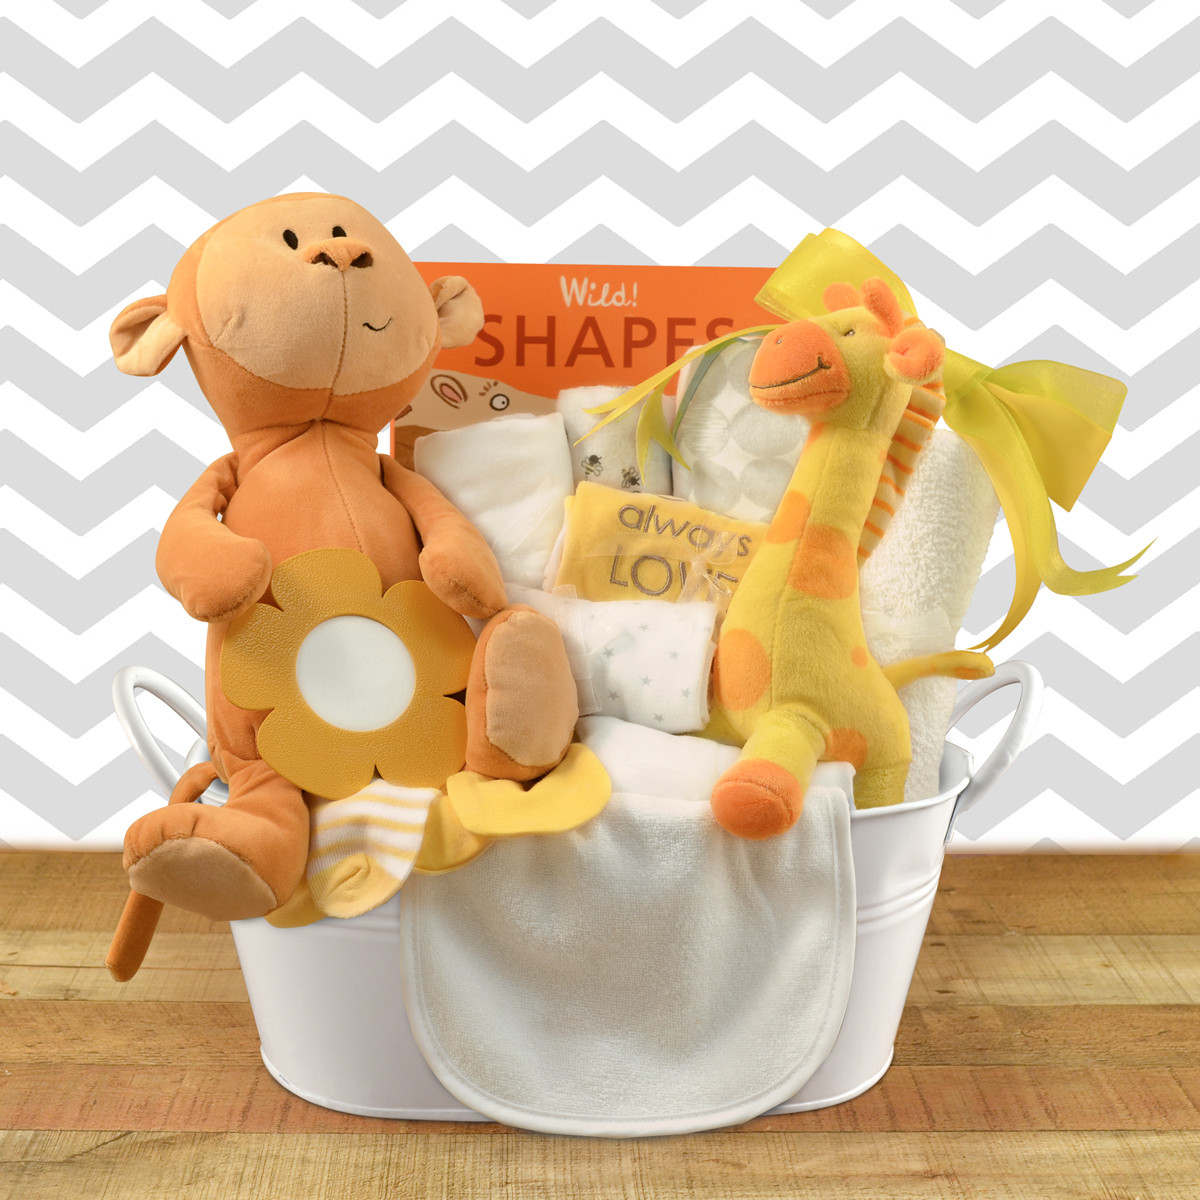 Welcome Home Baby Large Gift Basket